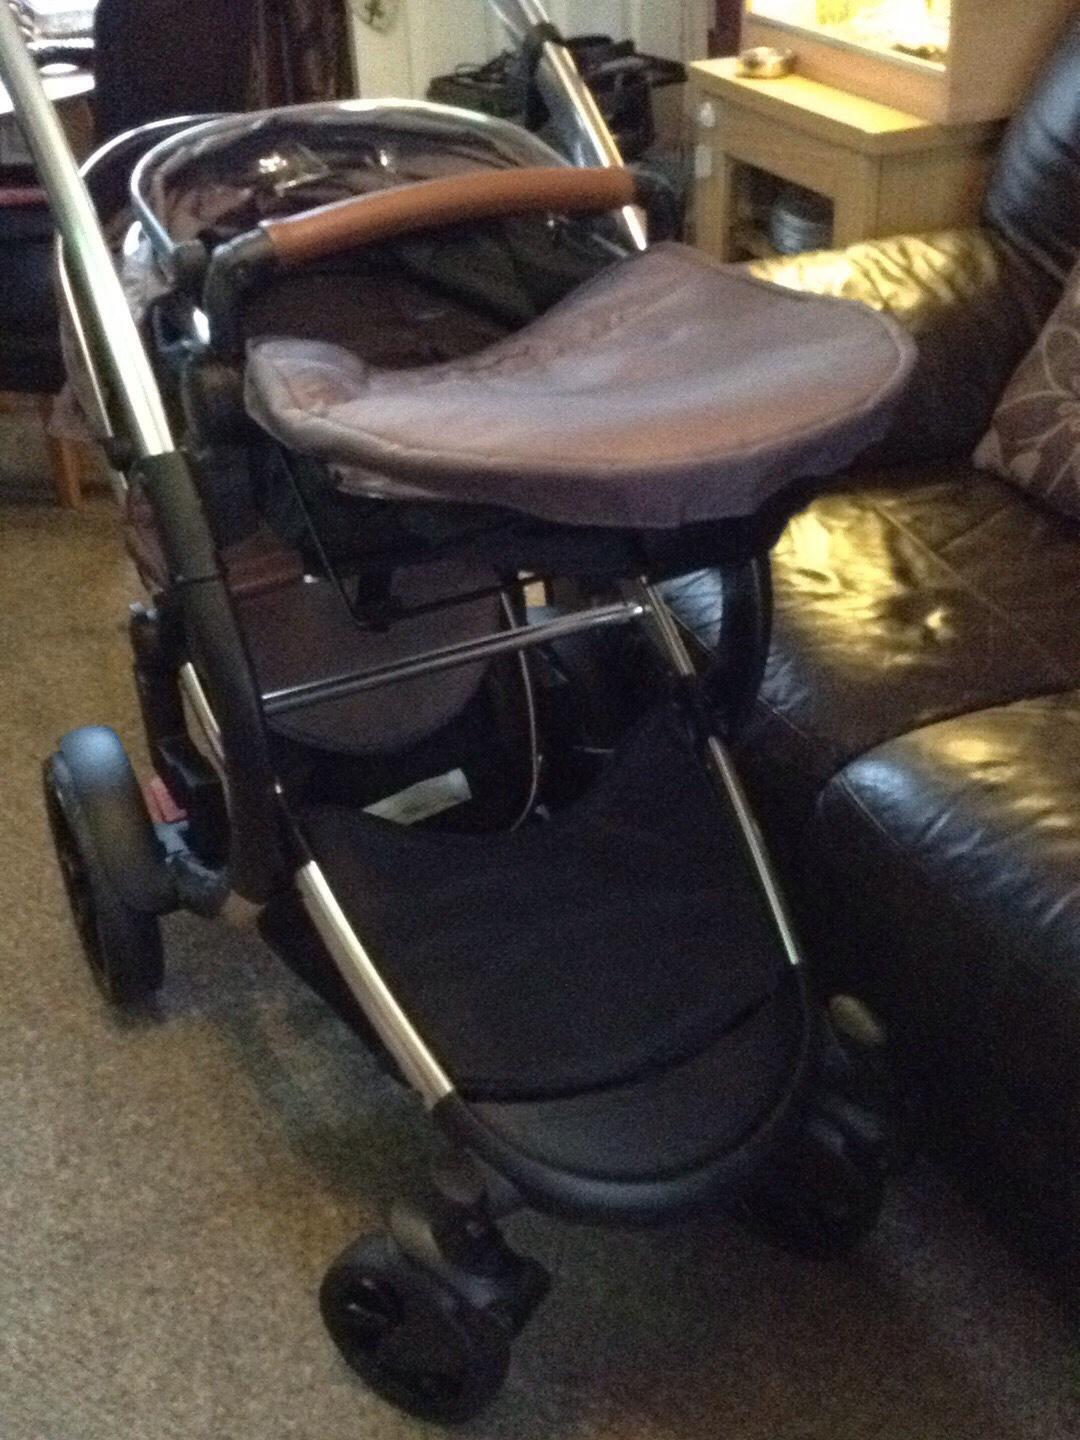 infababy duo double buggy